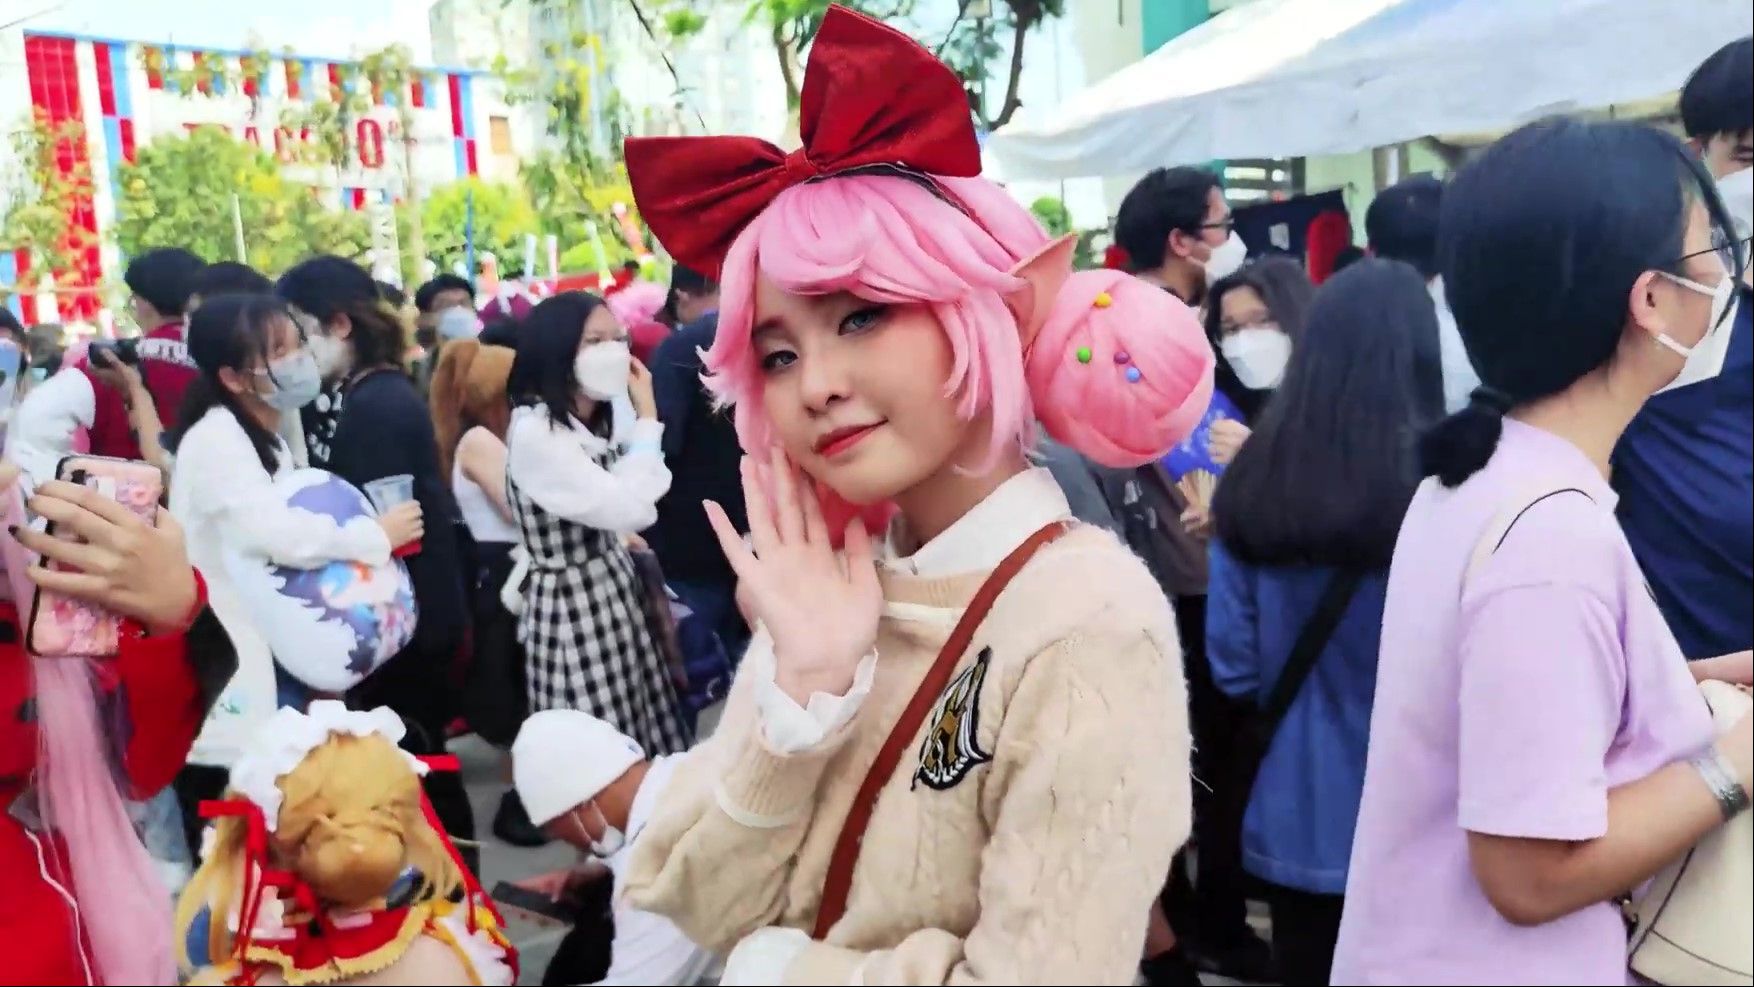 let's go to anime dallas 2022 🌷 idols(fest), performances 🥝 + more 🧋|  i♡n anime convention vlog - YouTube